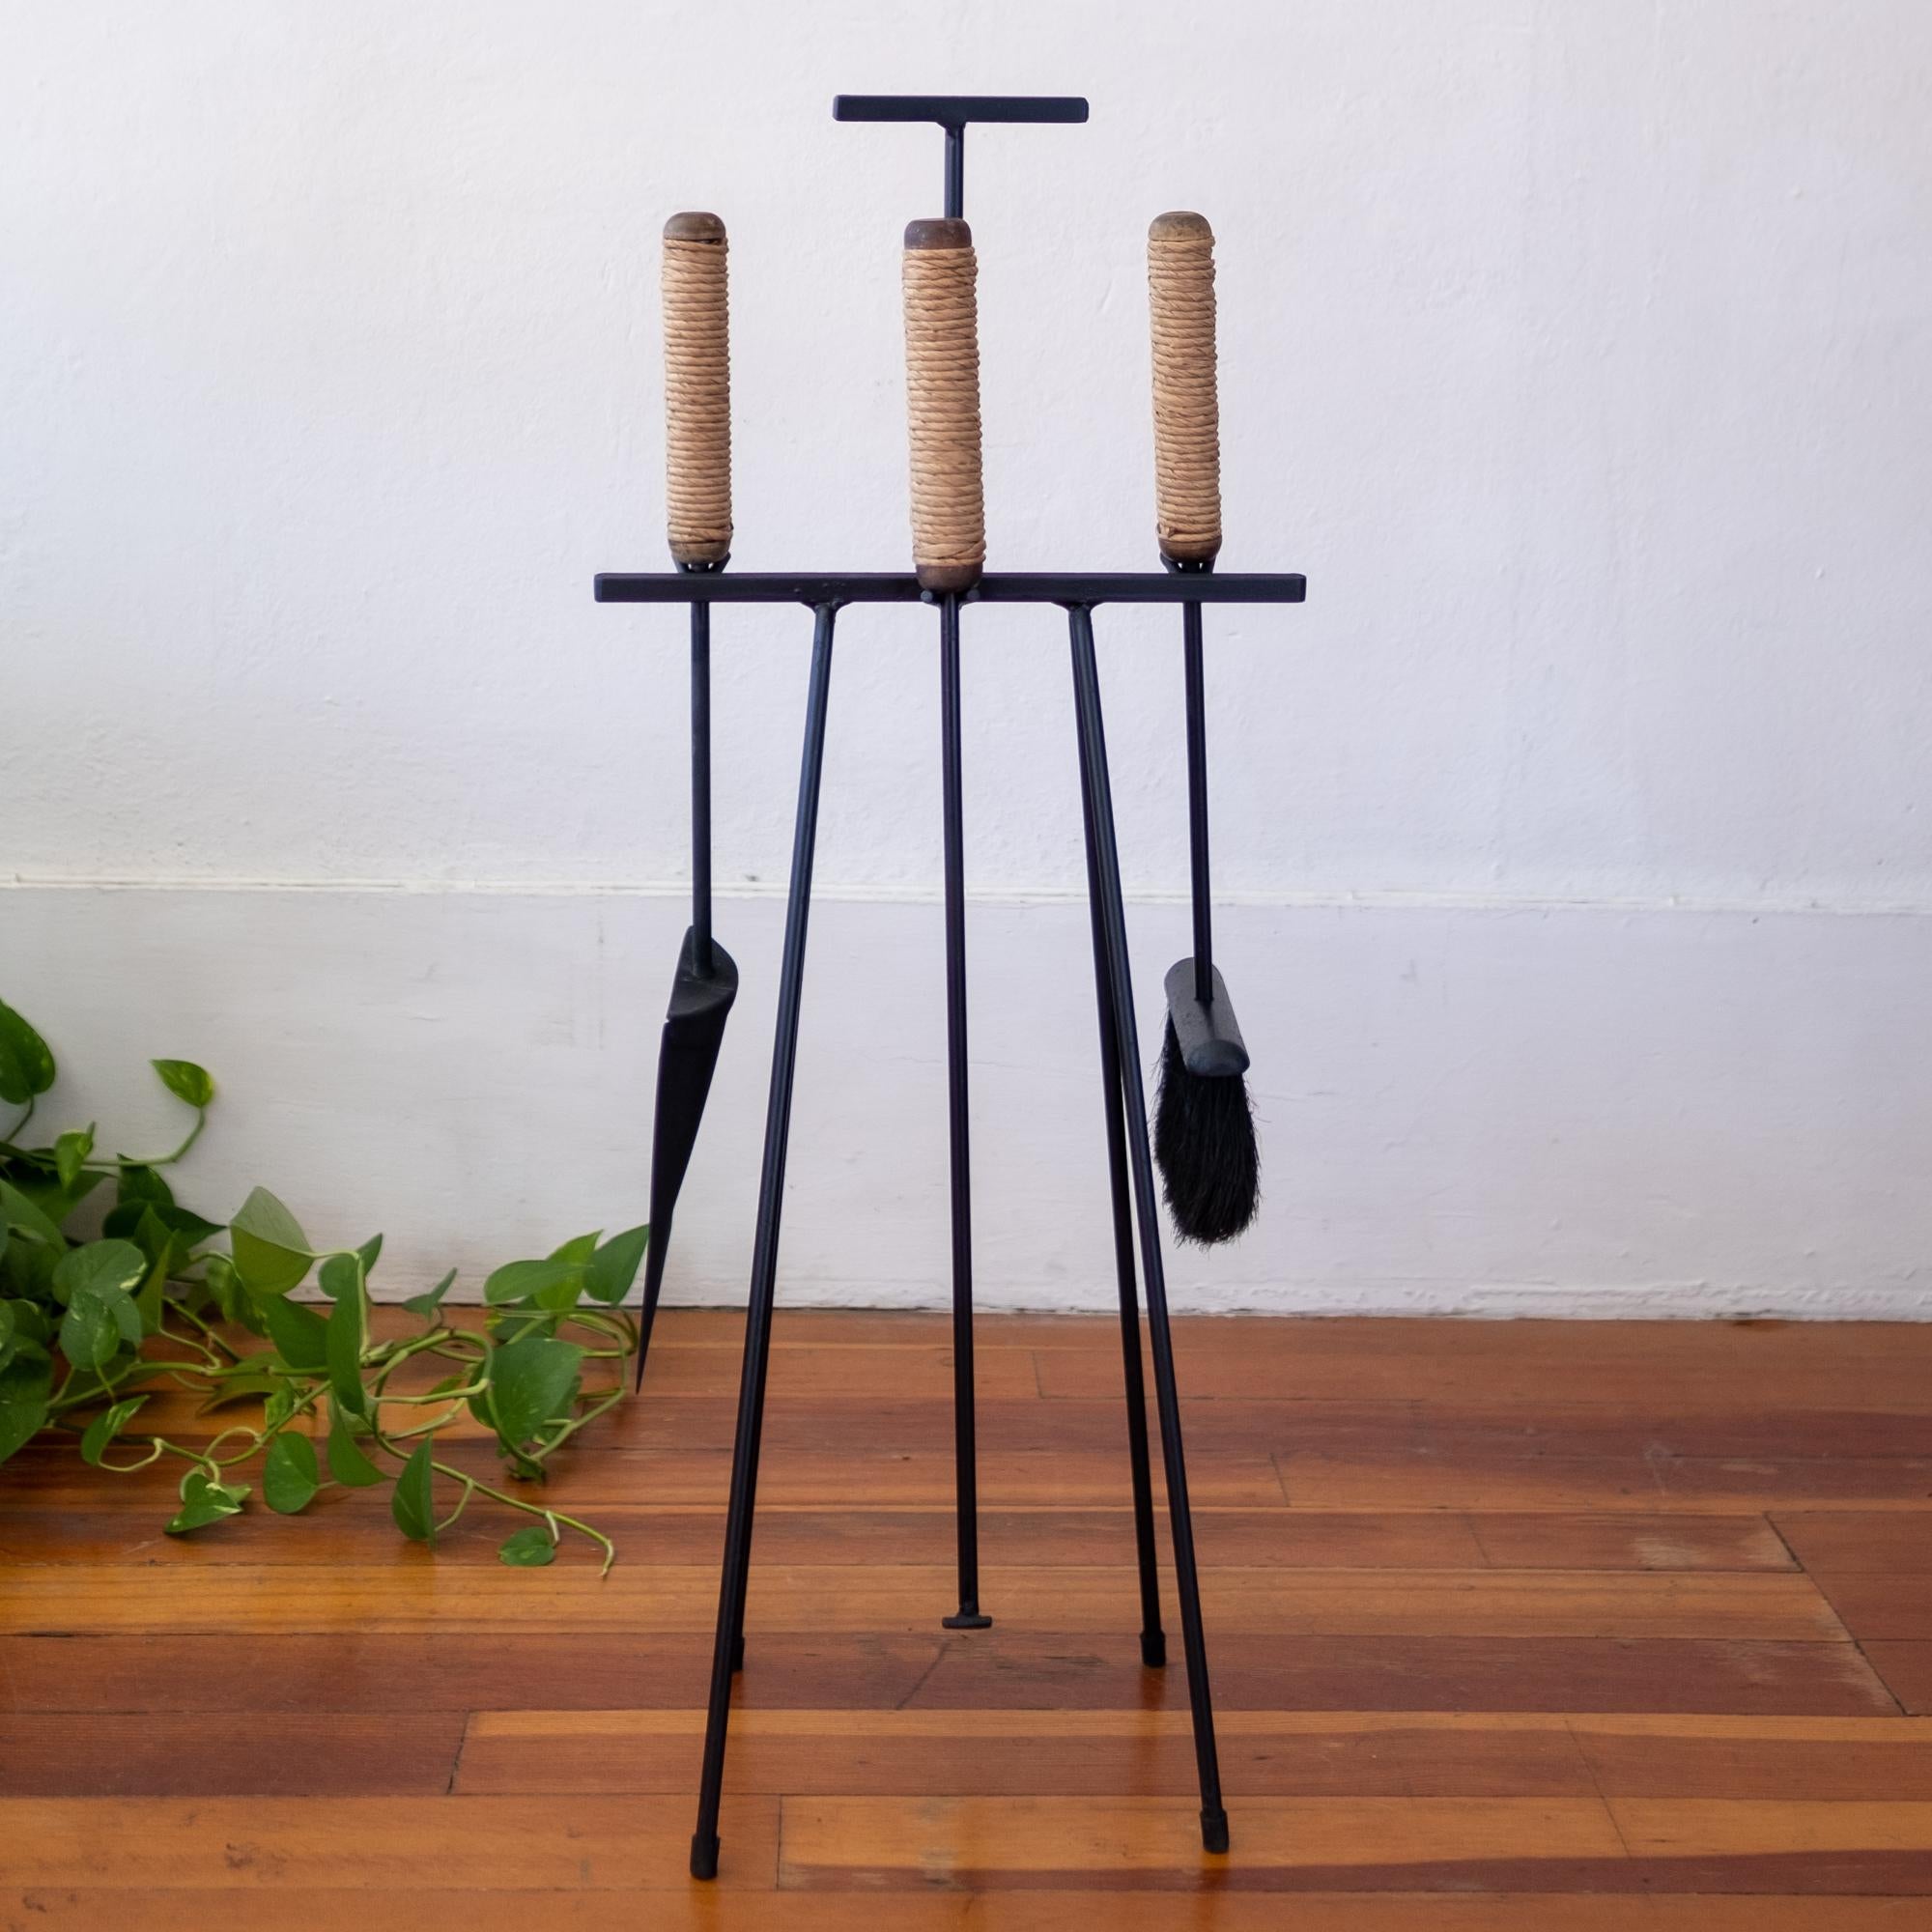 Iron and wood fireplace tools with cord-wrapped handles. Shovel, poker and broom on a floor stand. A striking functional and architectural design by Tony Paul, 1950s.